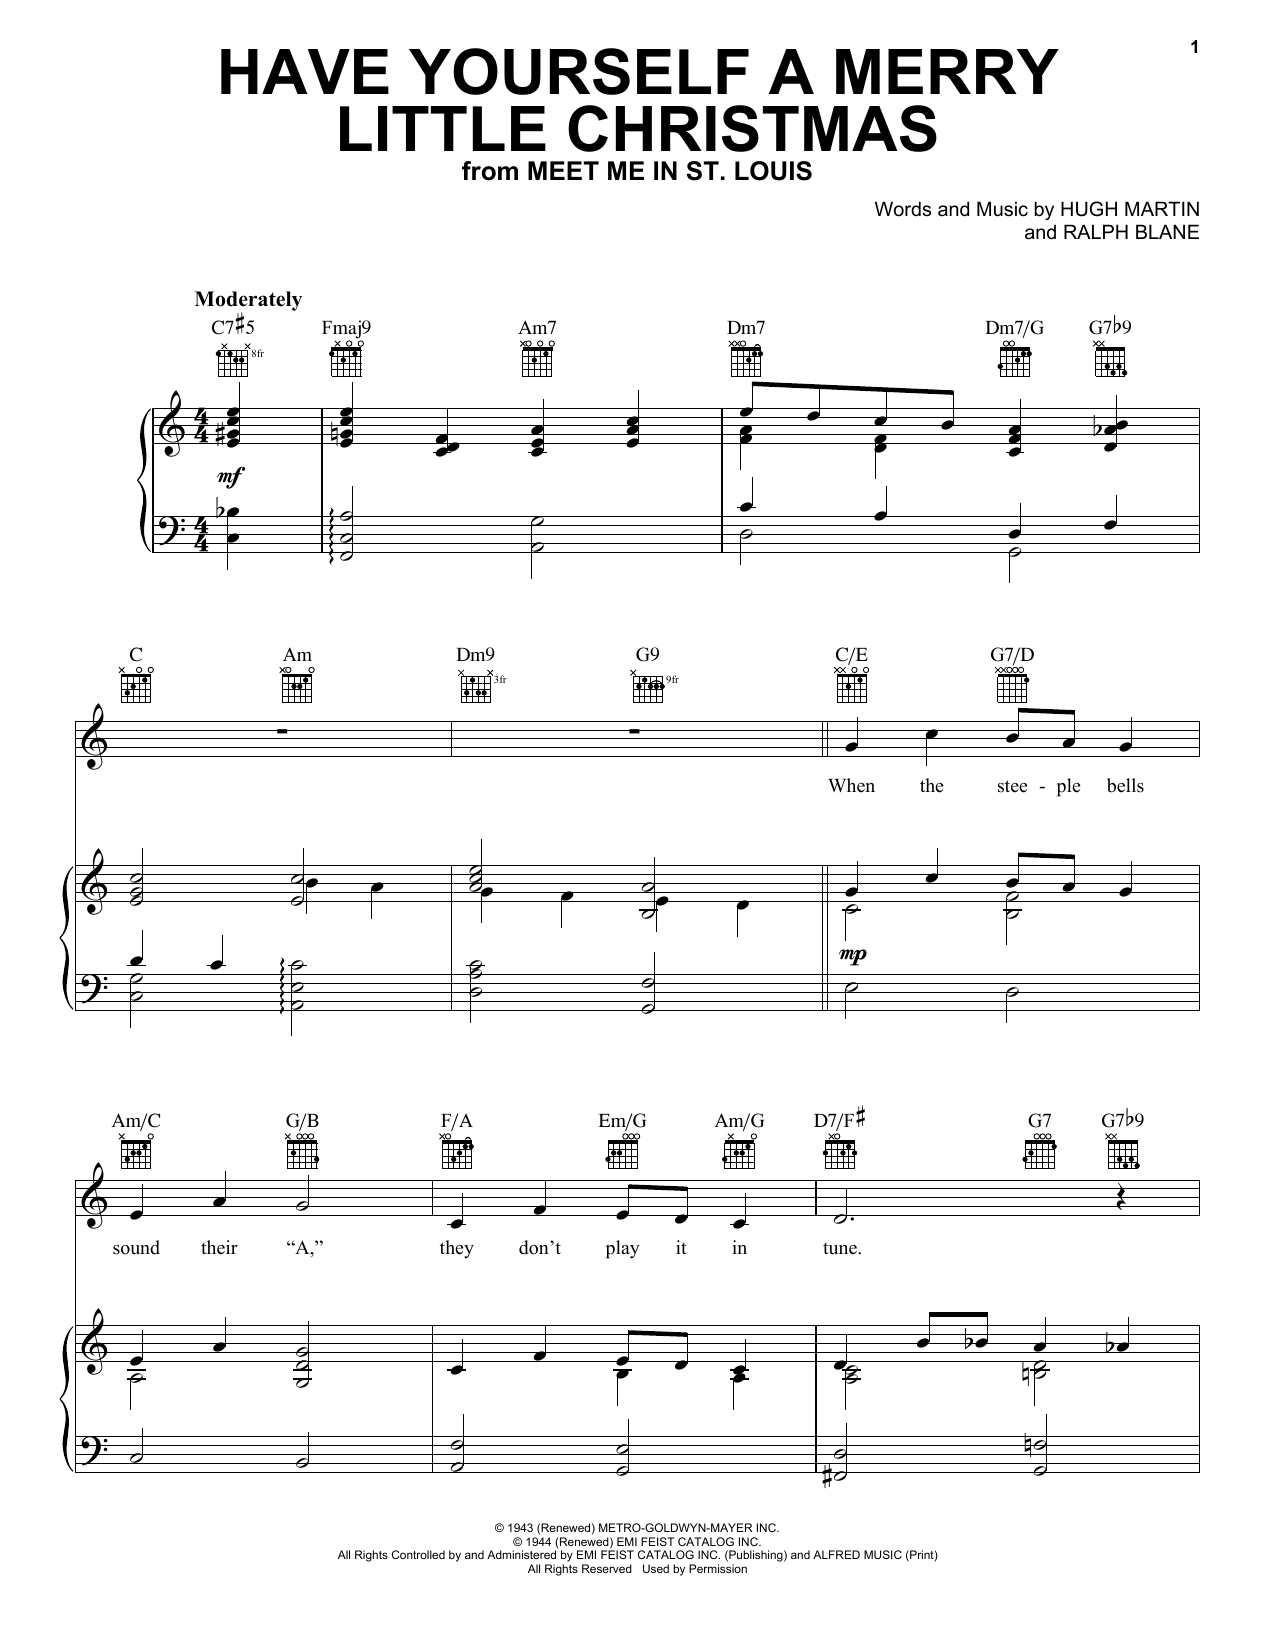 Frank Sinatra "Have Yourself A Merry Little Christmas" Sheet Music | Download Printable Christmas PDF Score | To Play On Easy Ukulele Tab? SKU 150742